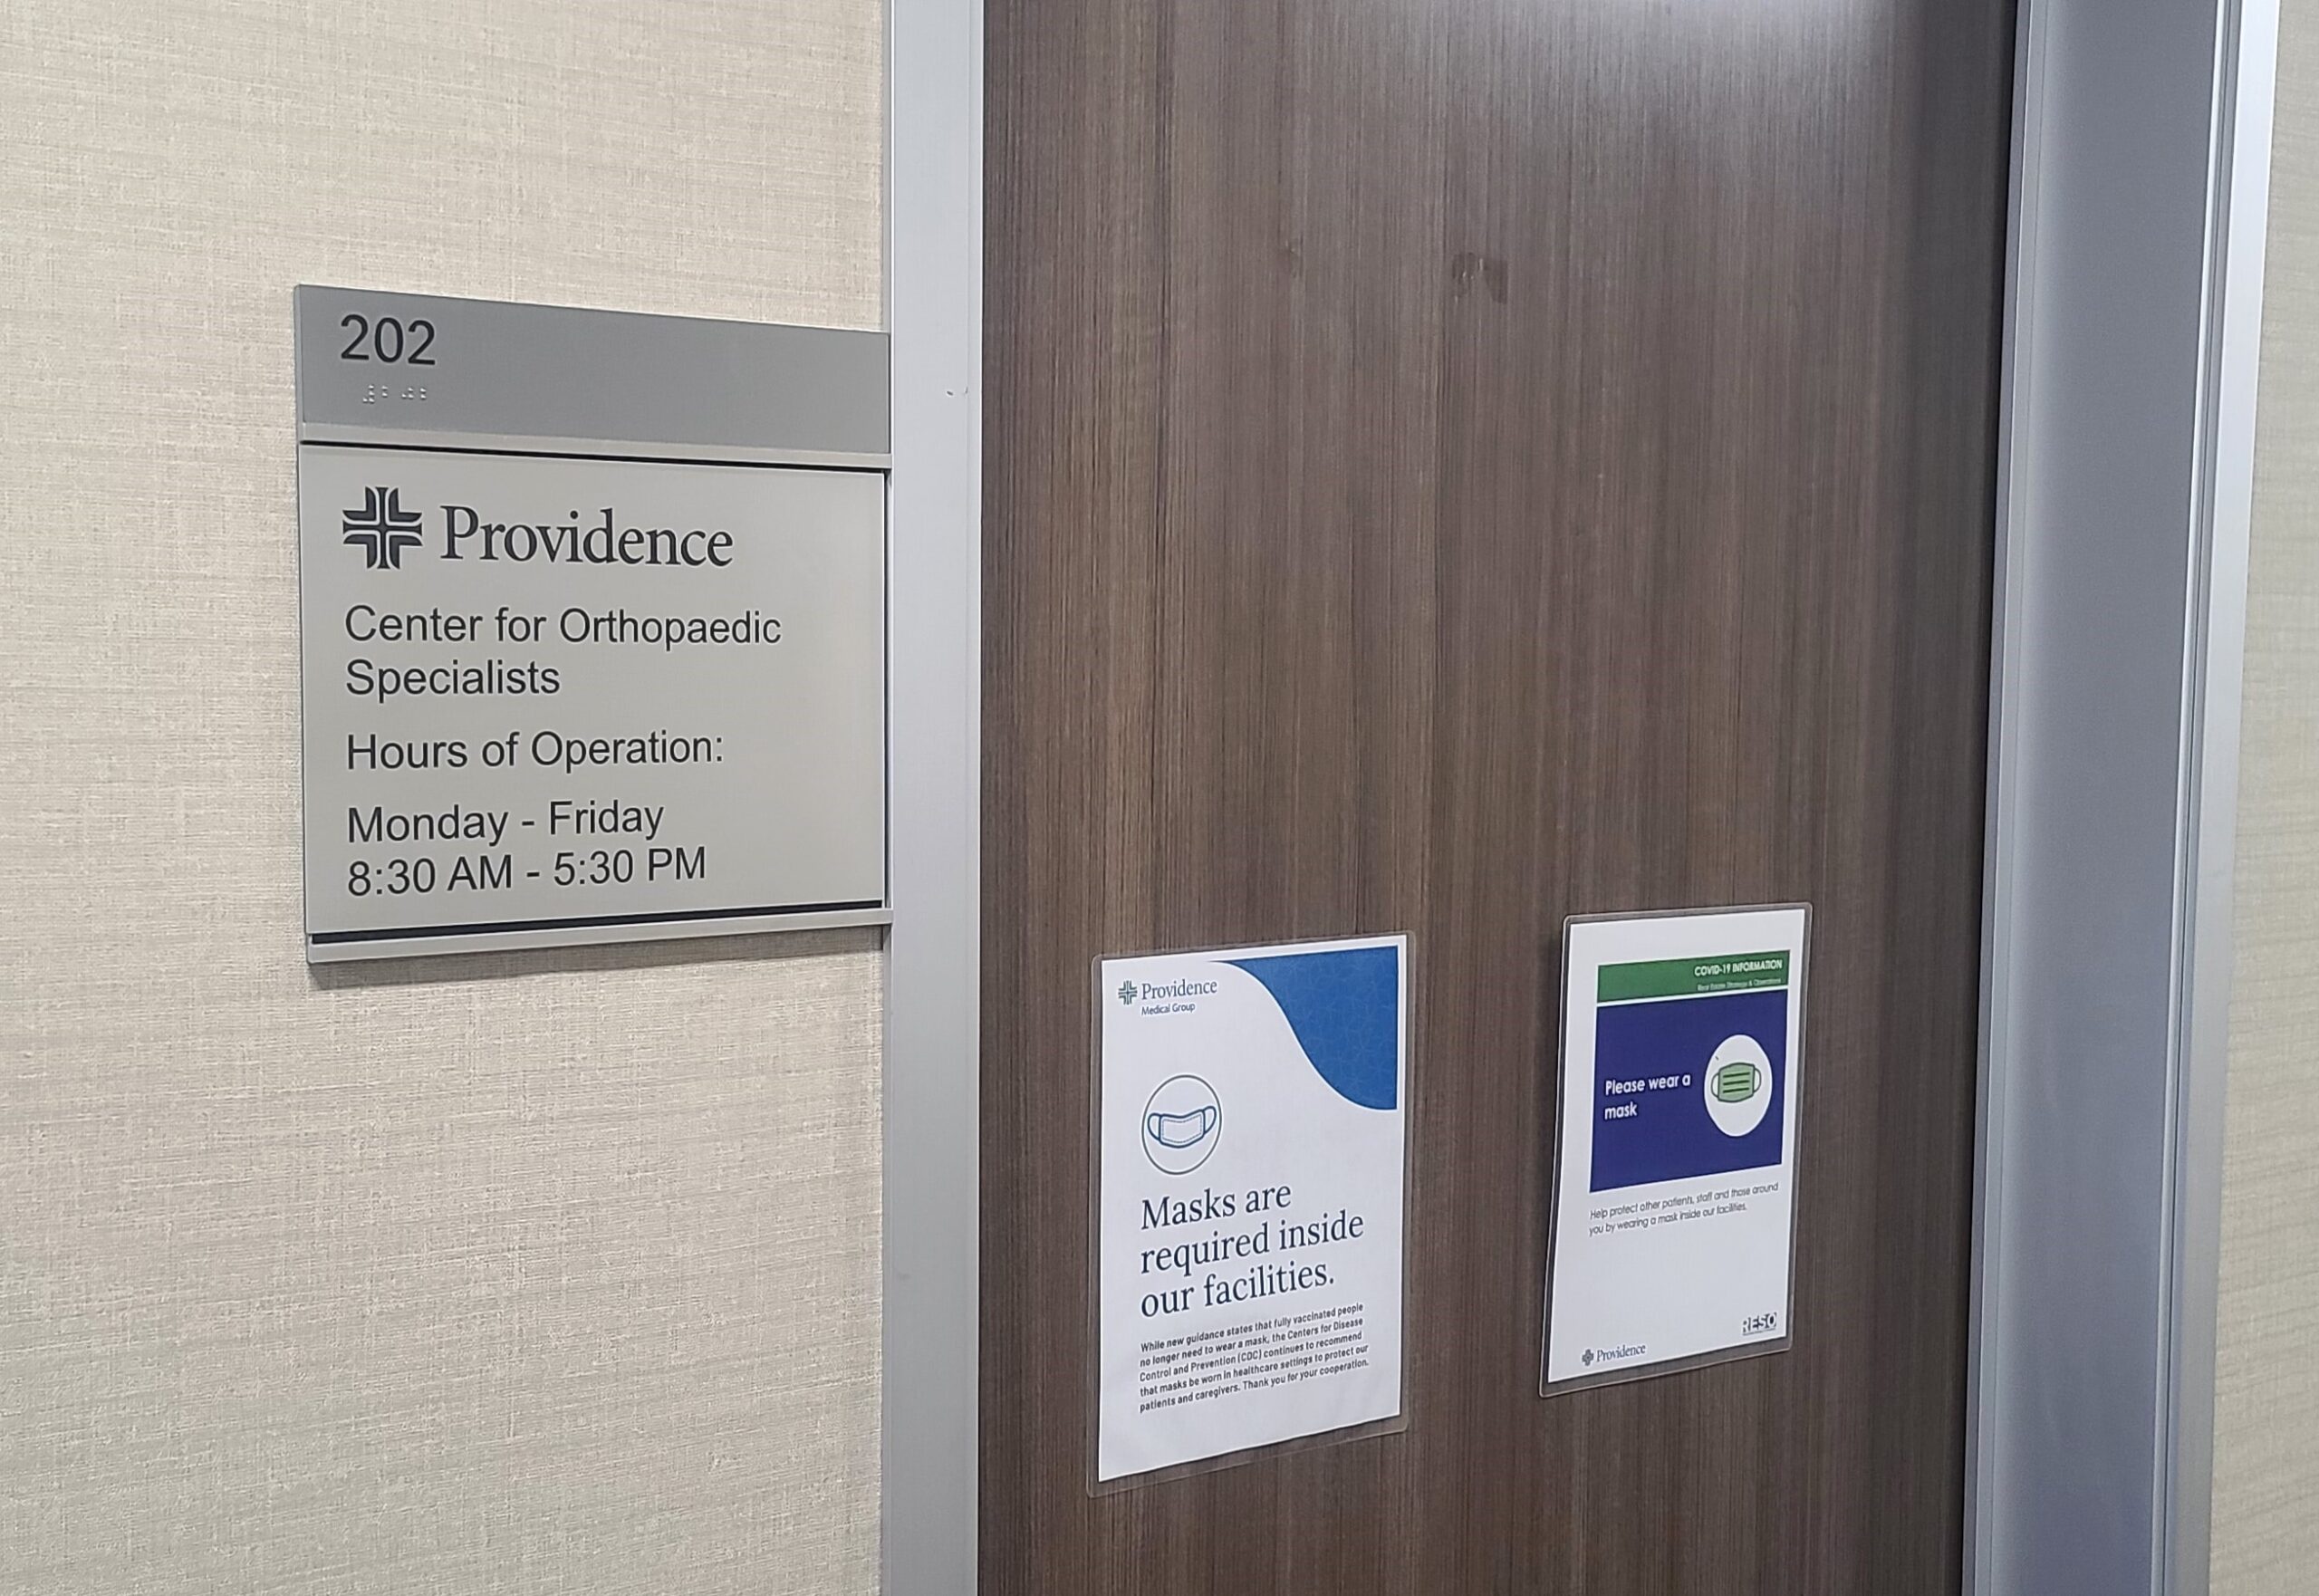 This is our clinic sign for Providence Center for Orthopaedic Specialists. With this aluminum plaque sign finding their location will be much easier for patients and staff alike.